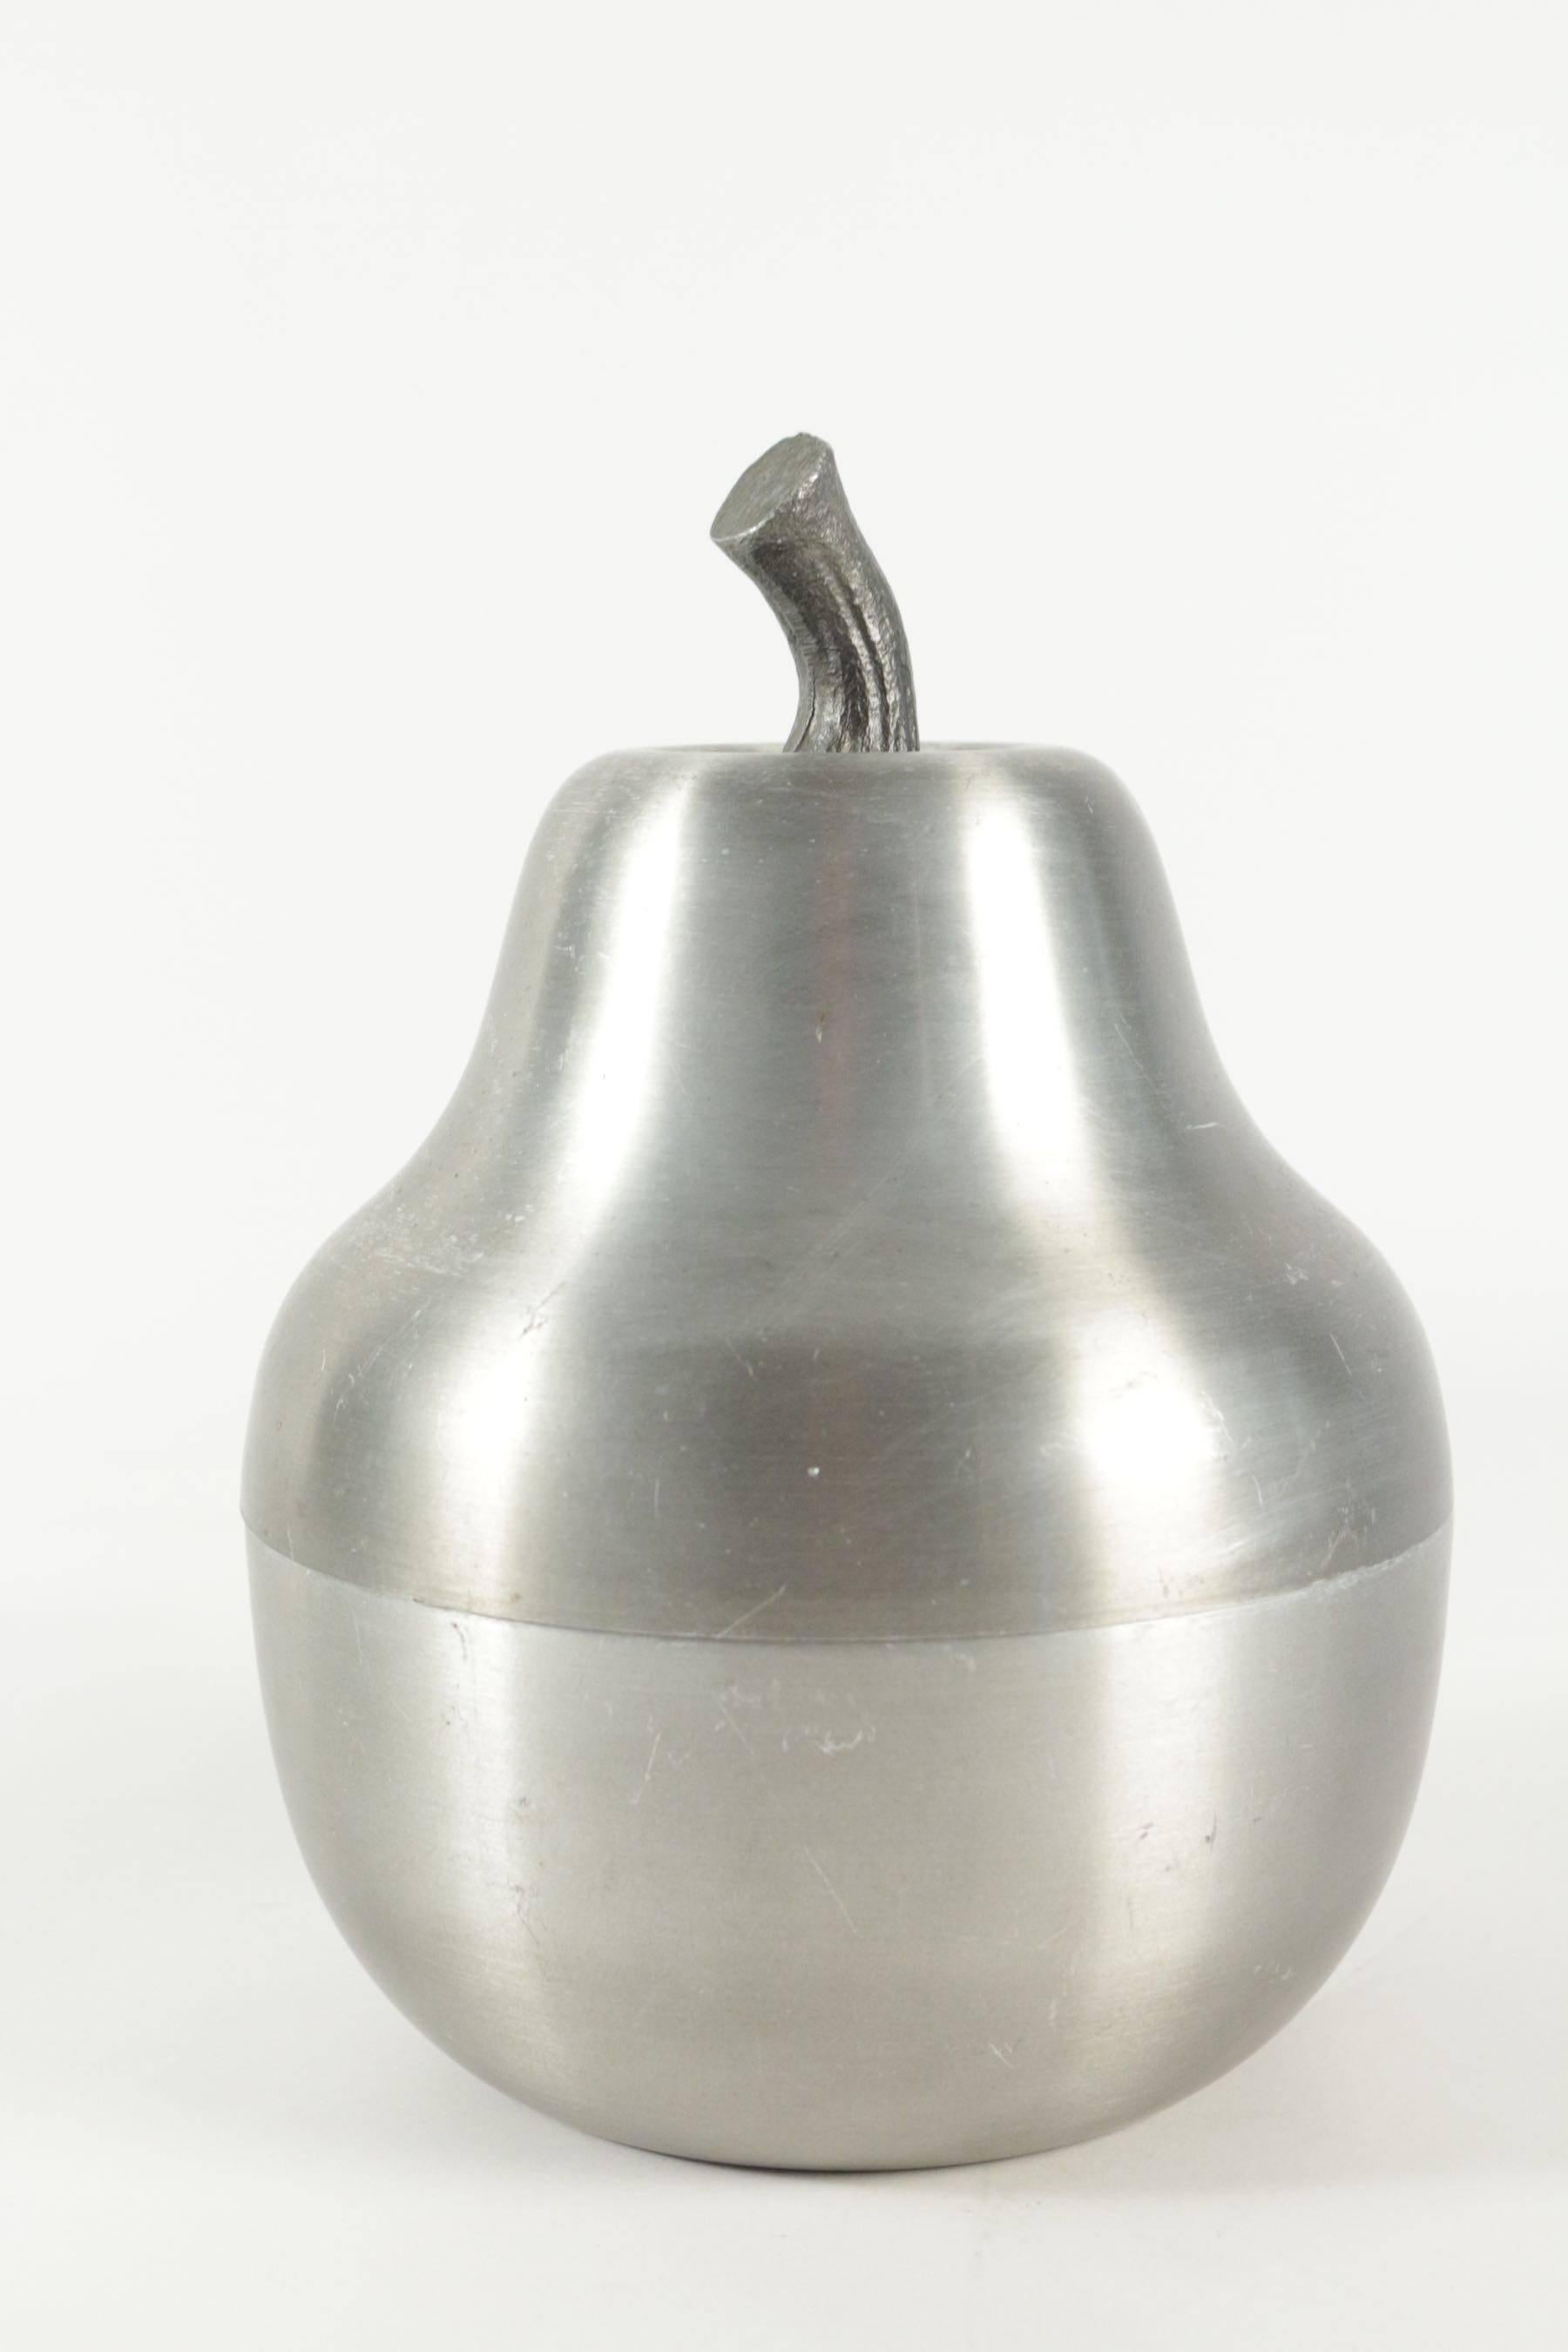 Cool ice bucket in the shape of a pear in brushed aluminum from the 1970s.
 